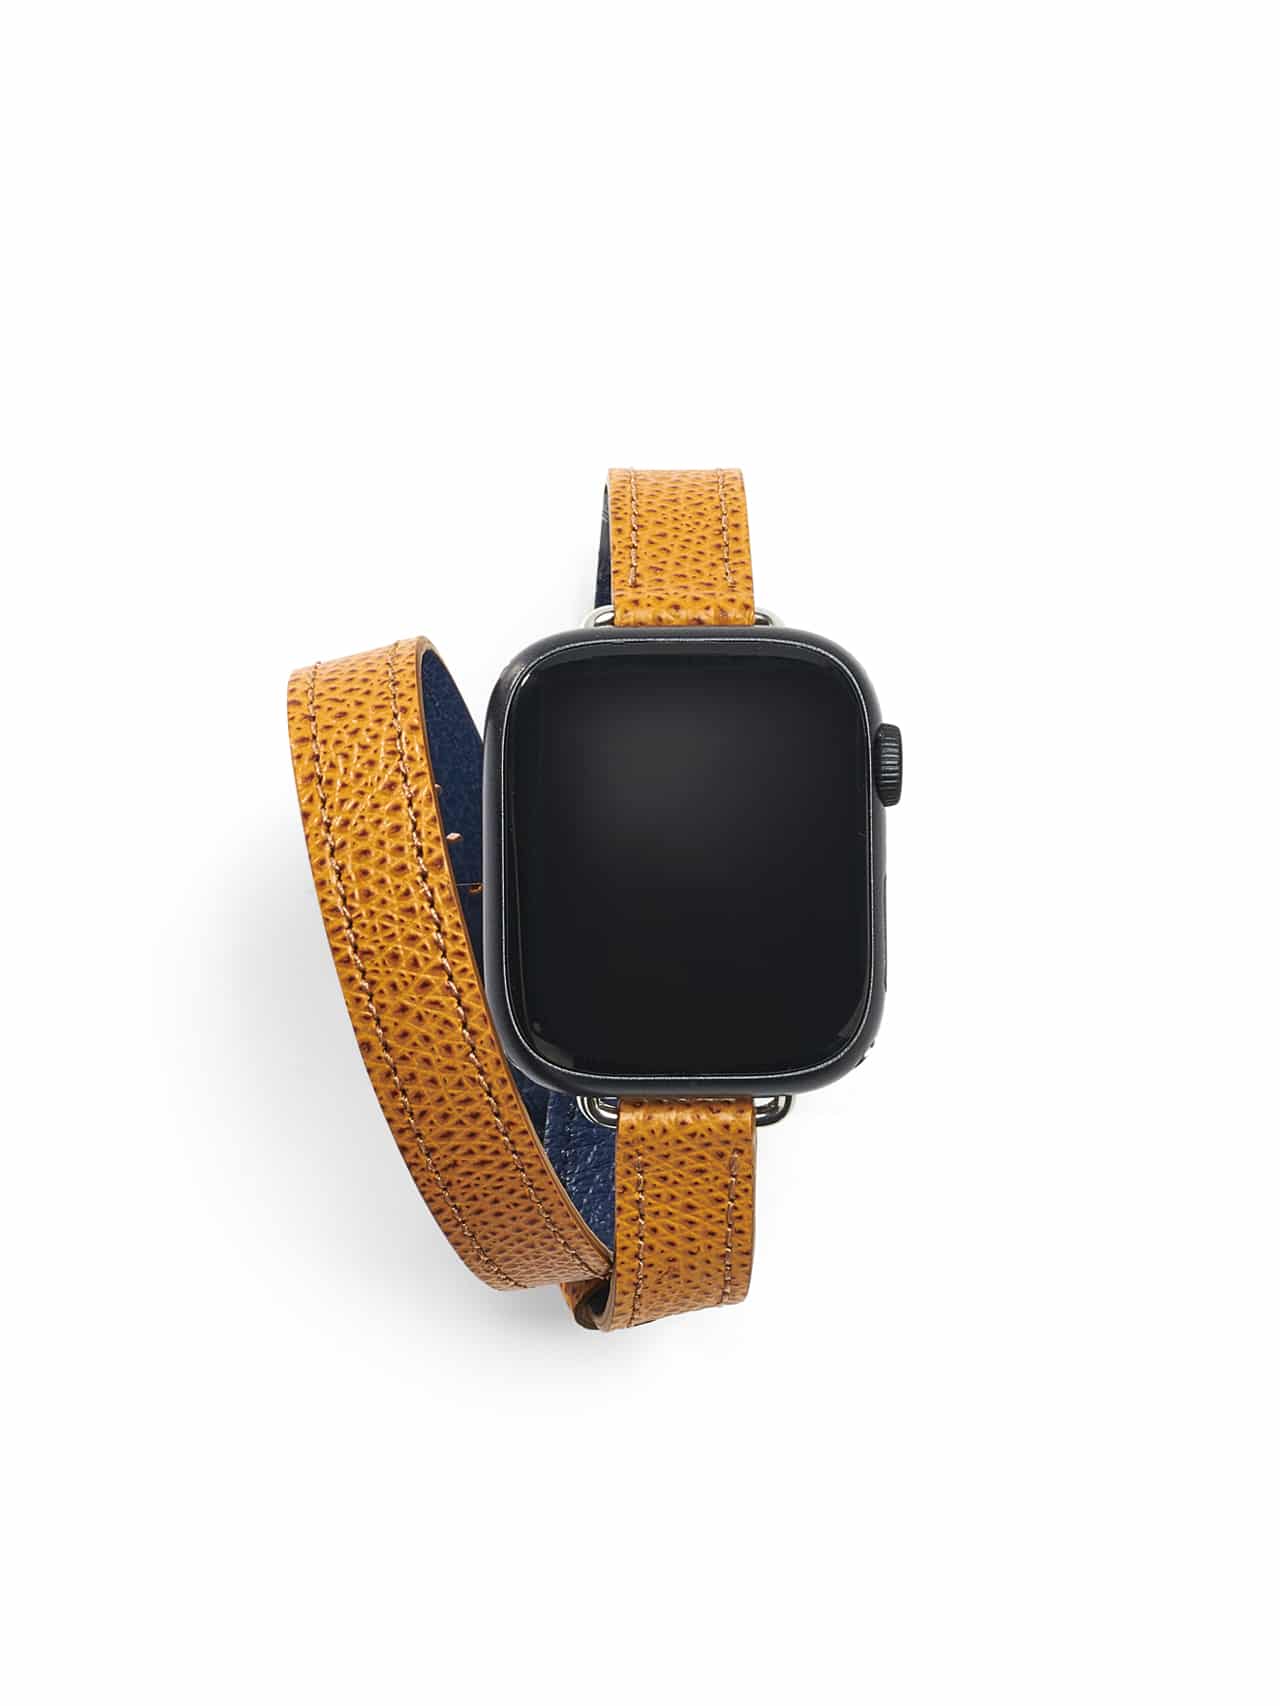 leather strap apple watch gold brown